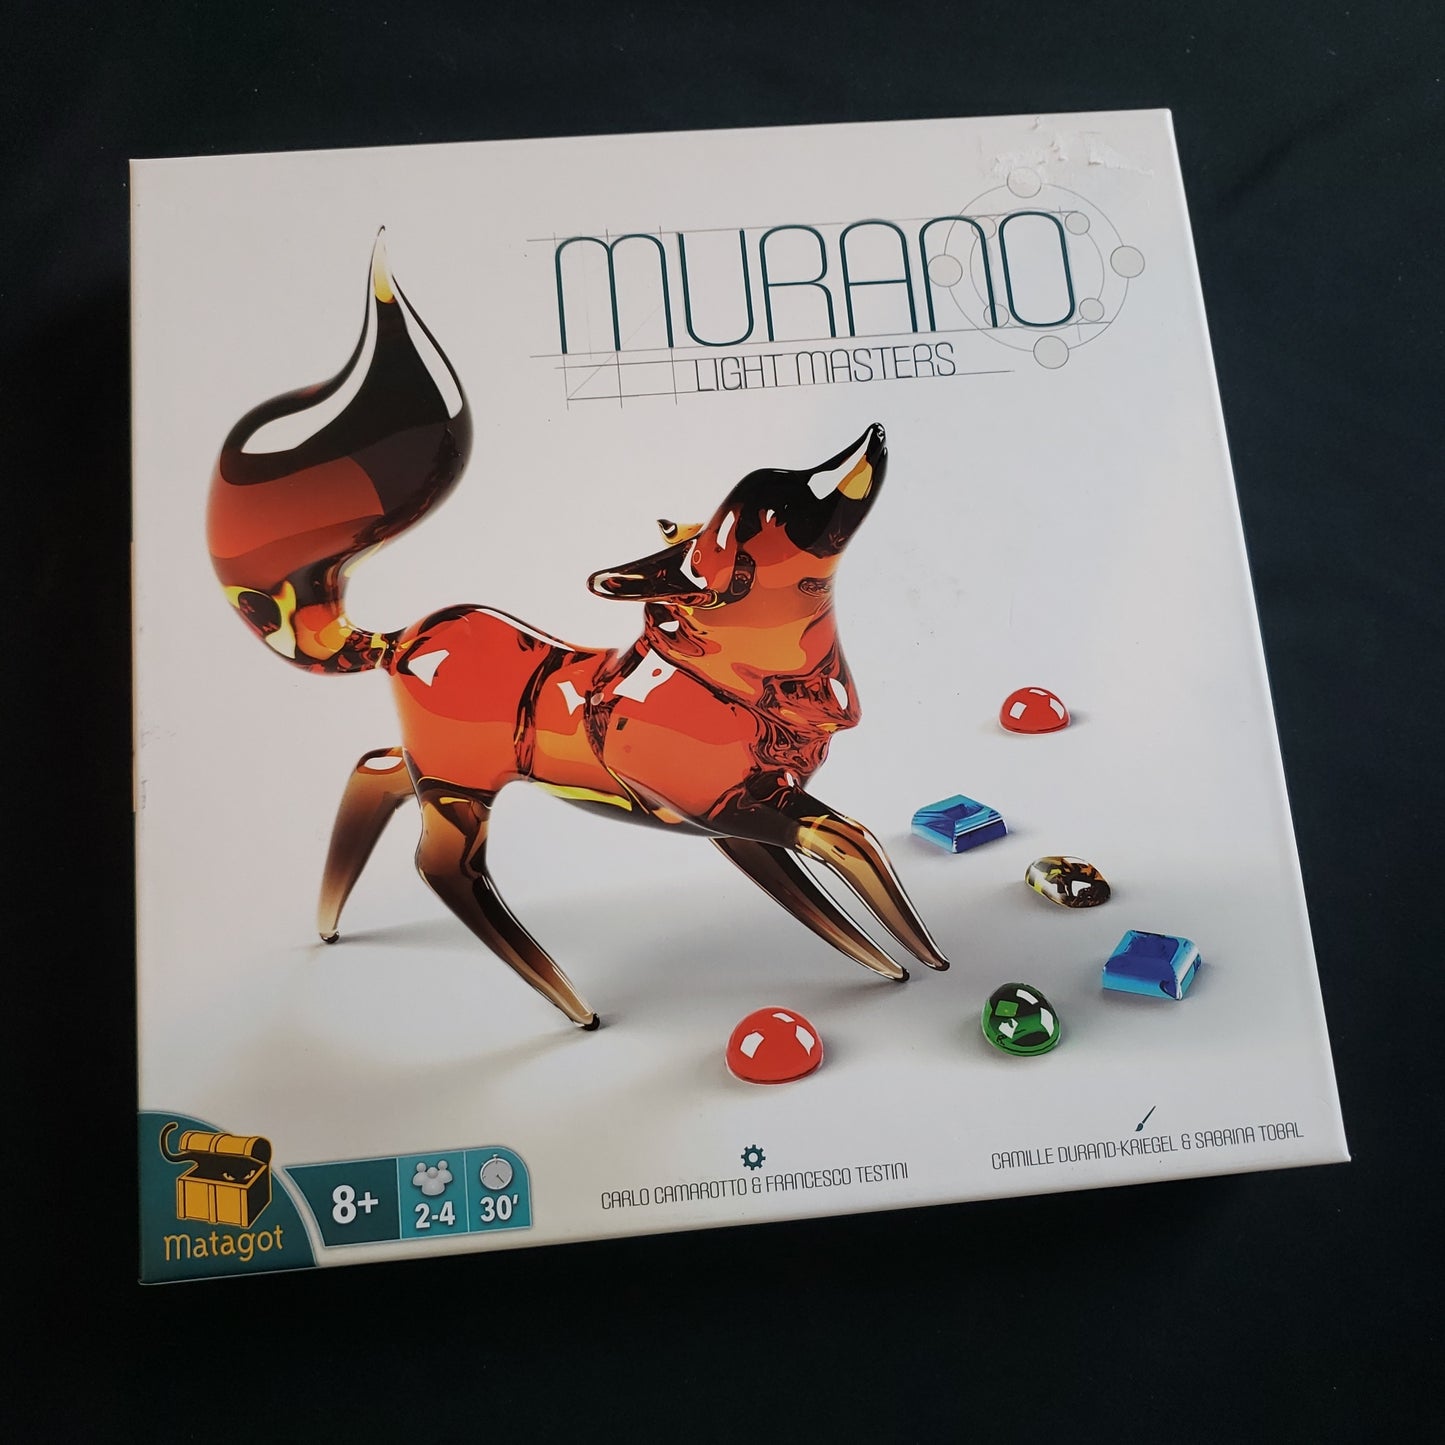 Image shows the front cover of the box of the Murano: Light Masters board game